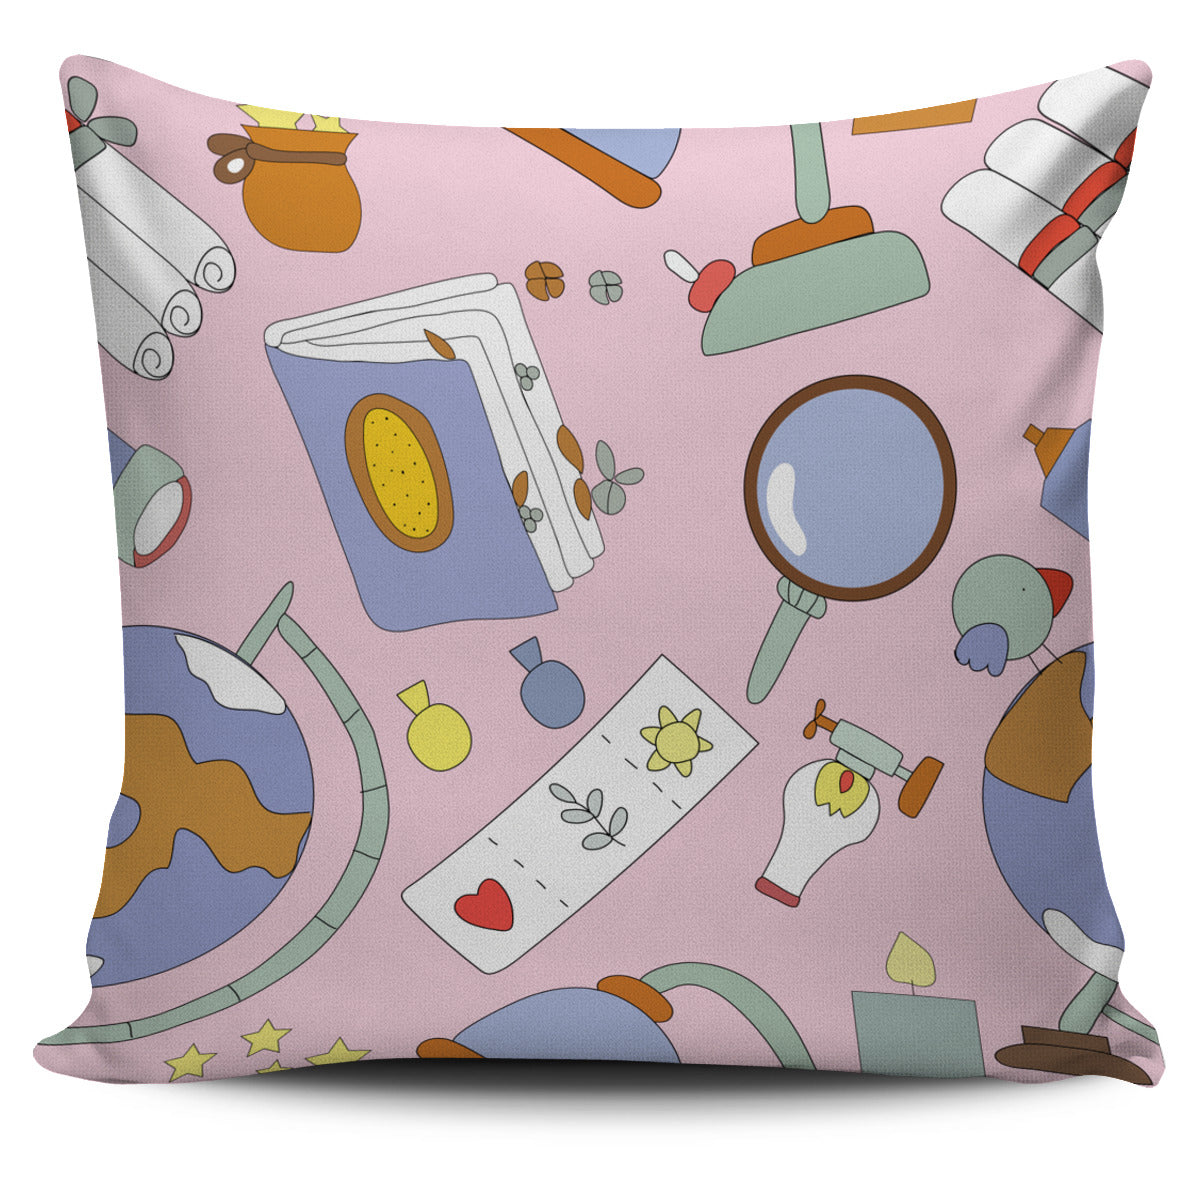 Creative Education Pillow Cover